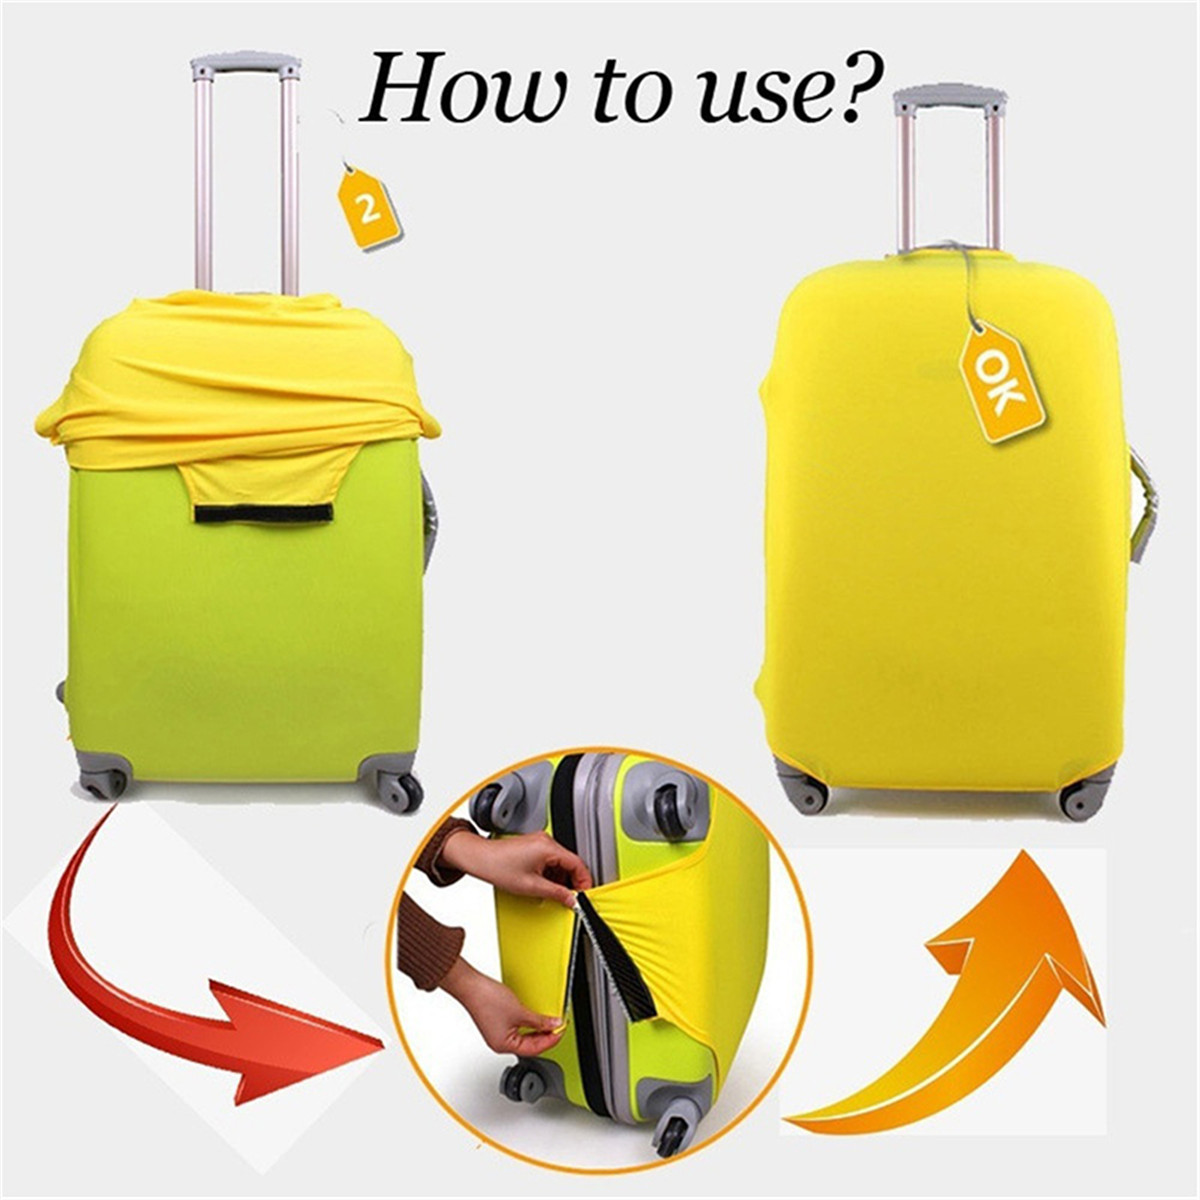 Outdoor-Travel-Suitcase-Waterproof-Cover-Luggage-Trolley-Carry-On-Case-Dust-Protector-1471813-5